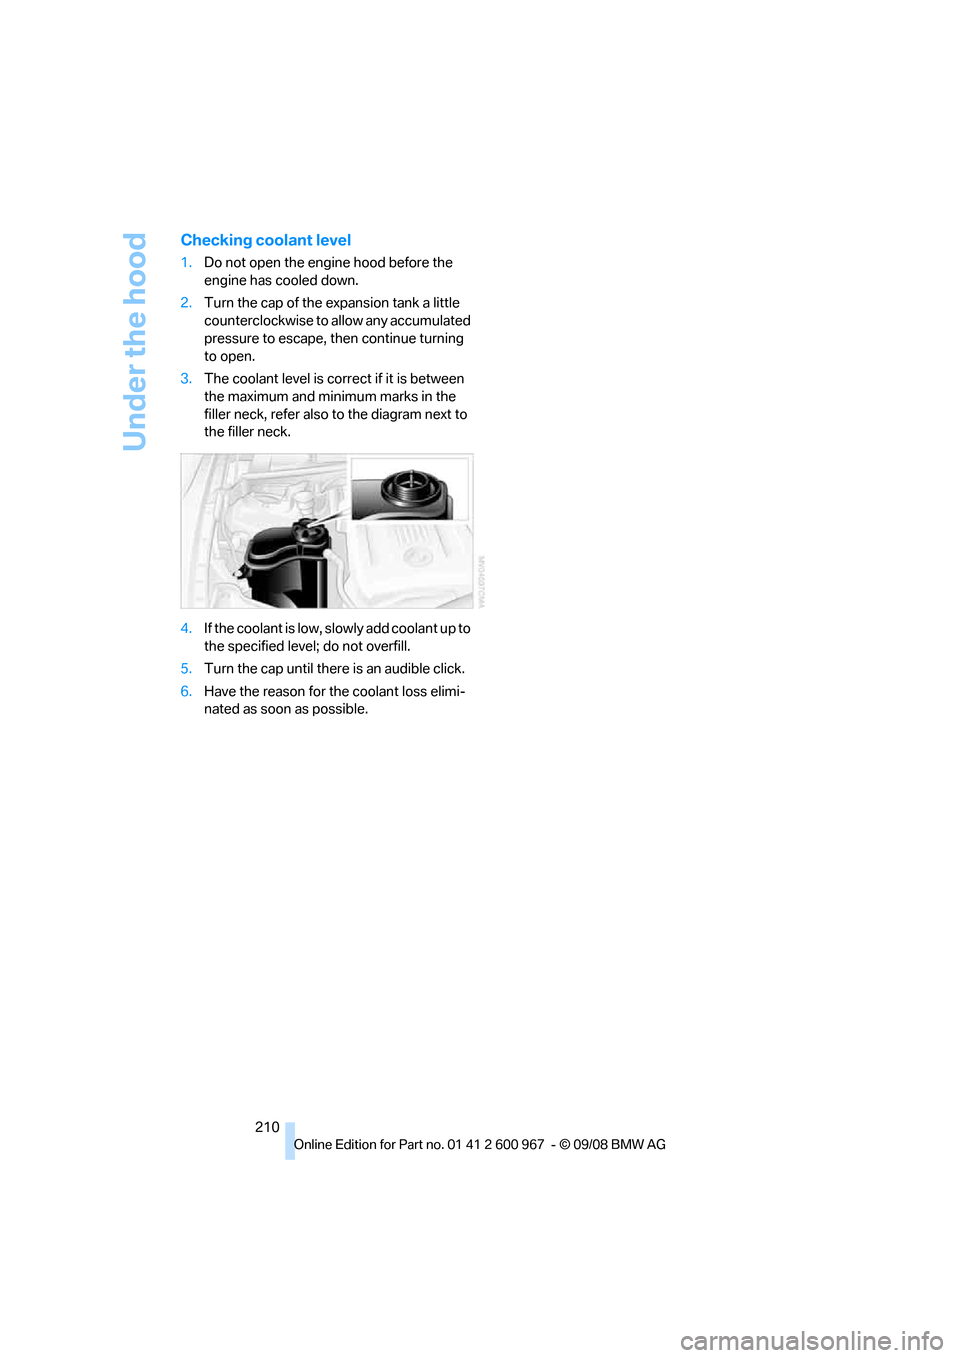 BMW 328I COUPE 2009 E92 Owners Manual Under the hood
210
Checking coolant level
1.Do not open the engine hood before the 
engine has cooled down.
2.Turn the cap of the expansion tank a little 
counterclockwise to allow any accumulated 
pr